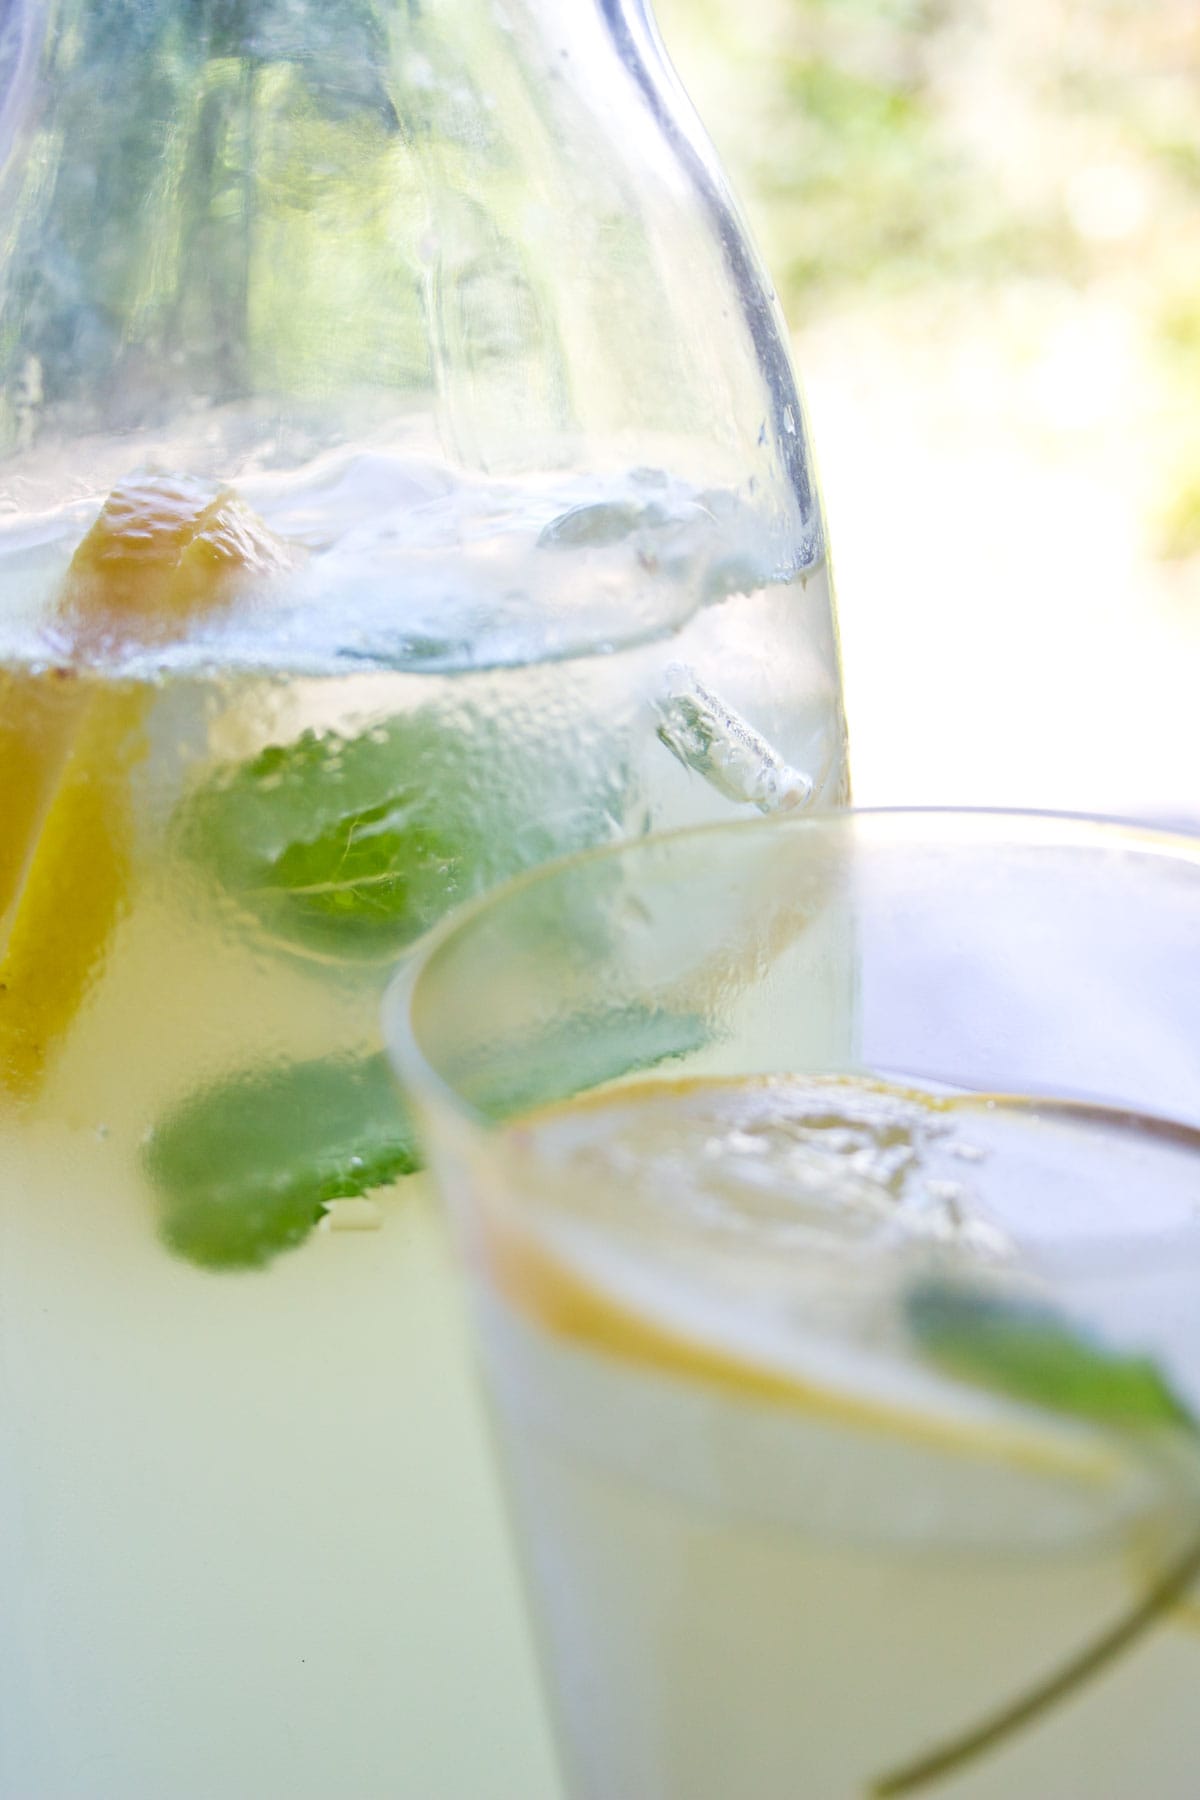 A jug with homemade ginger ale, mint leaves and lemon slices and a glass.